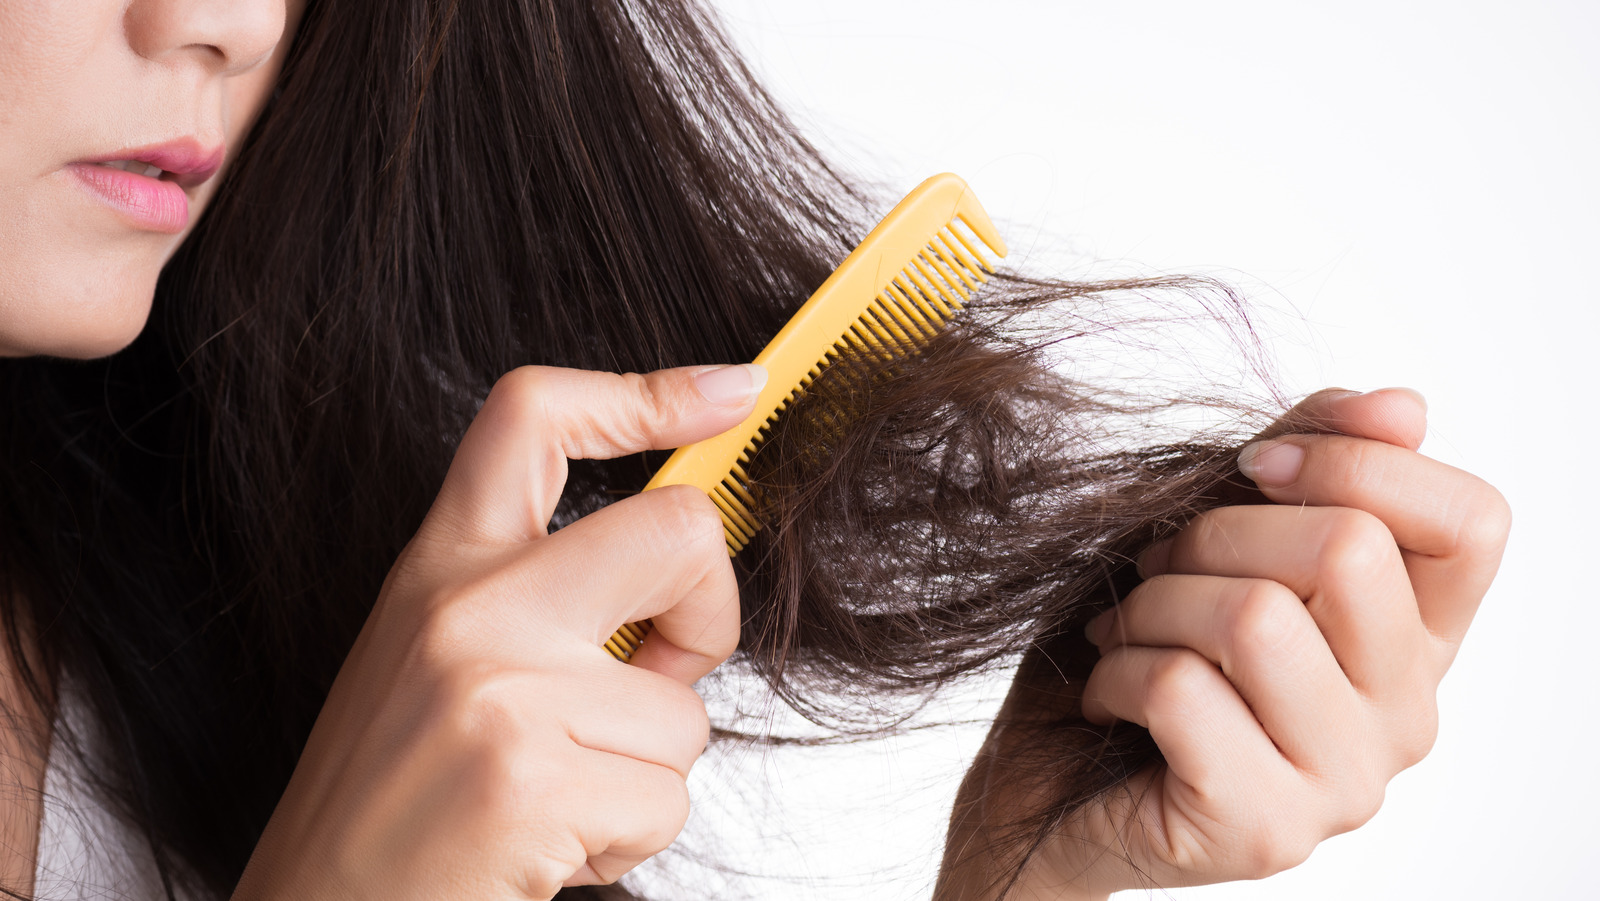 There Are 8 Types Of Hair Damage: Here's What You Need To Know